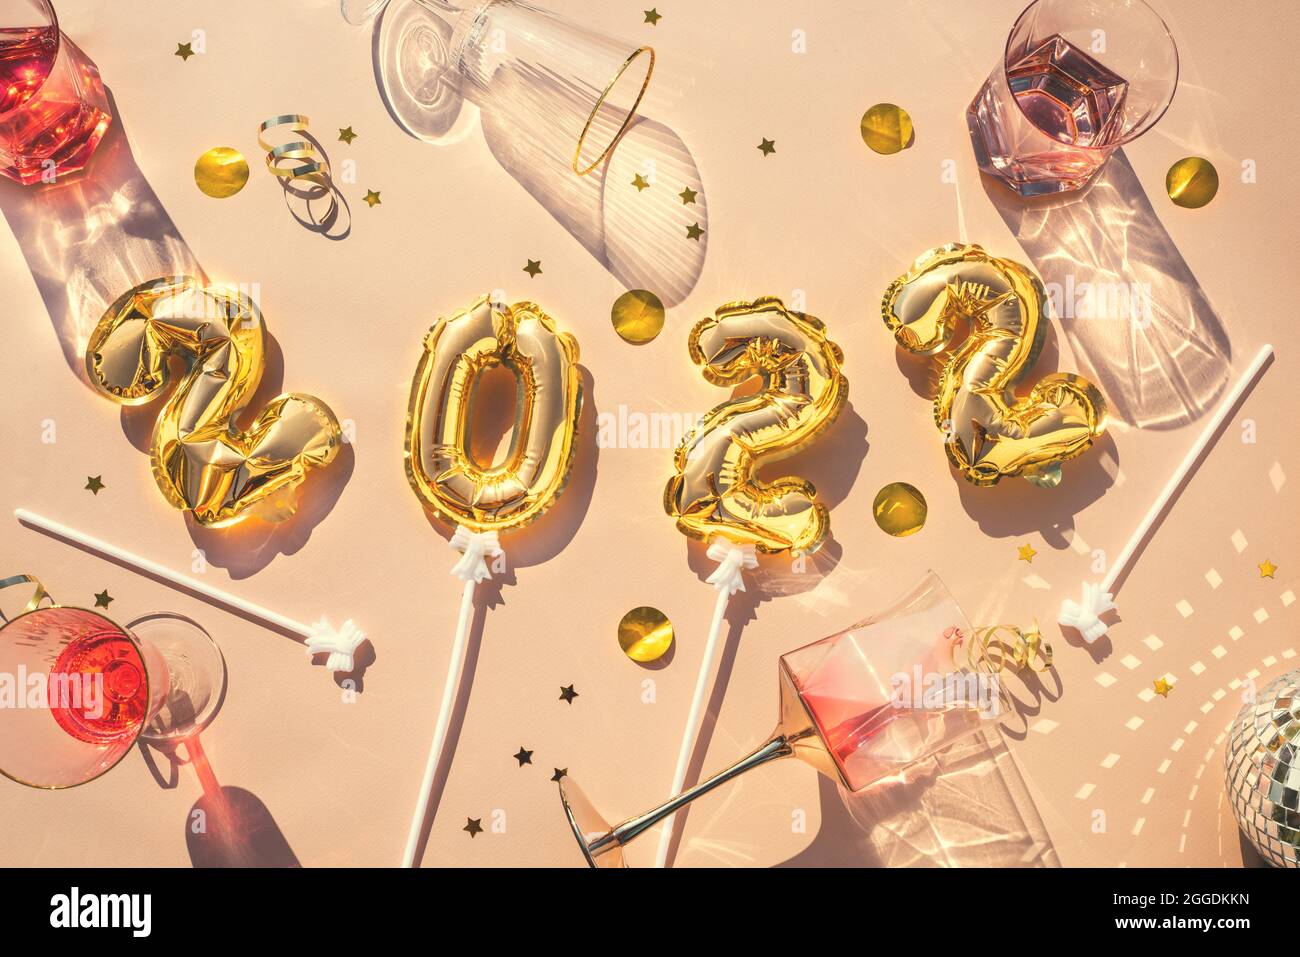 Gold balloons 2022, champagne glasses, confetti Concept of fun party, New Years celebration. After party. Stock Photo